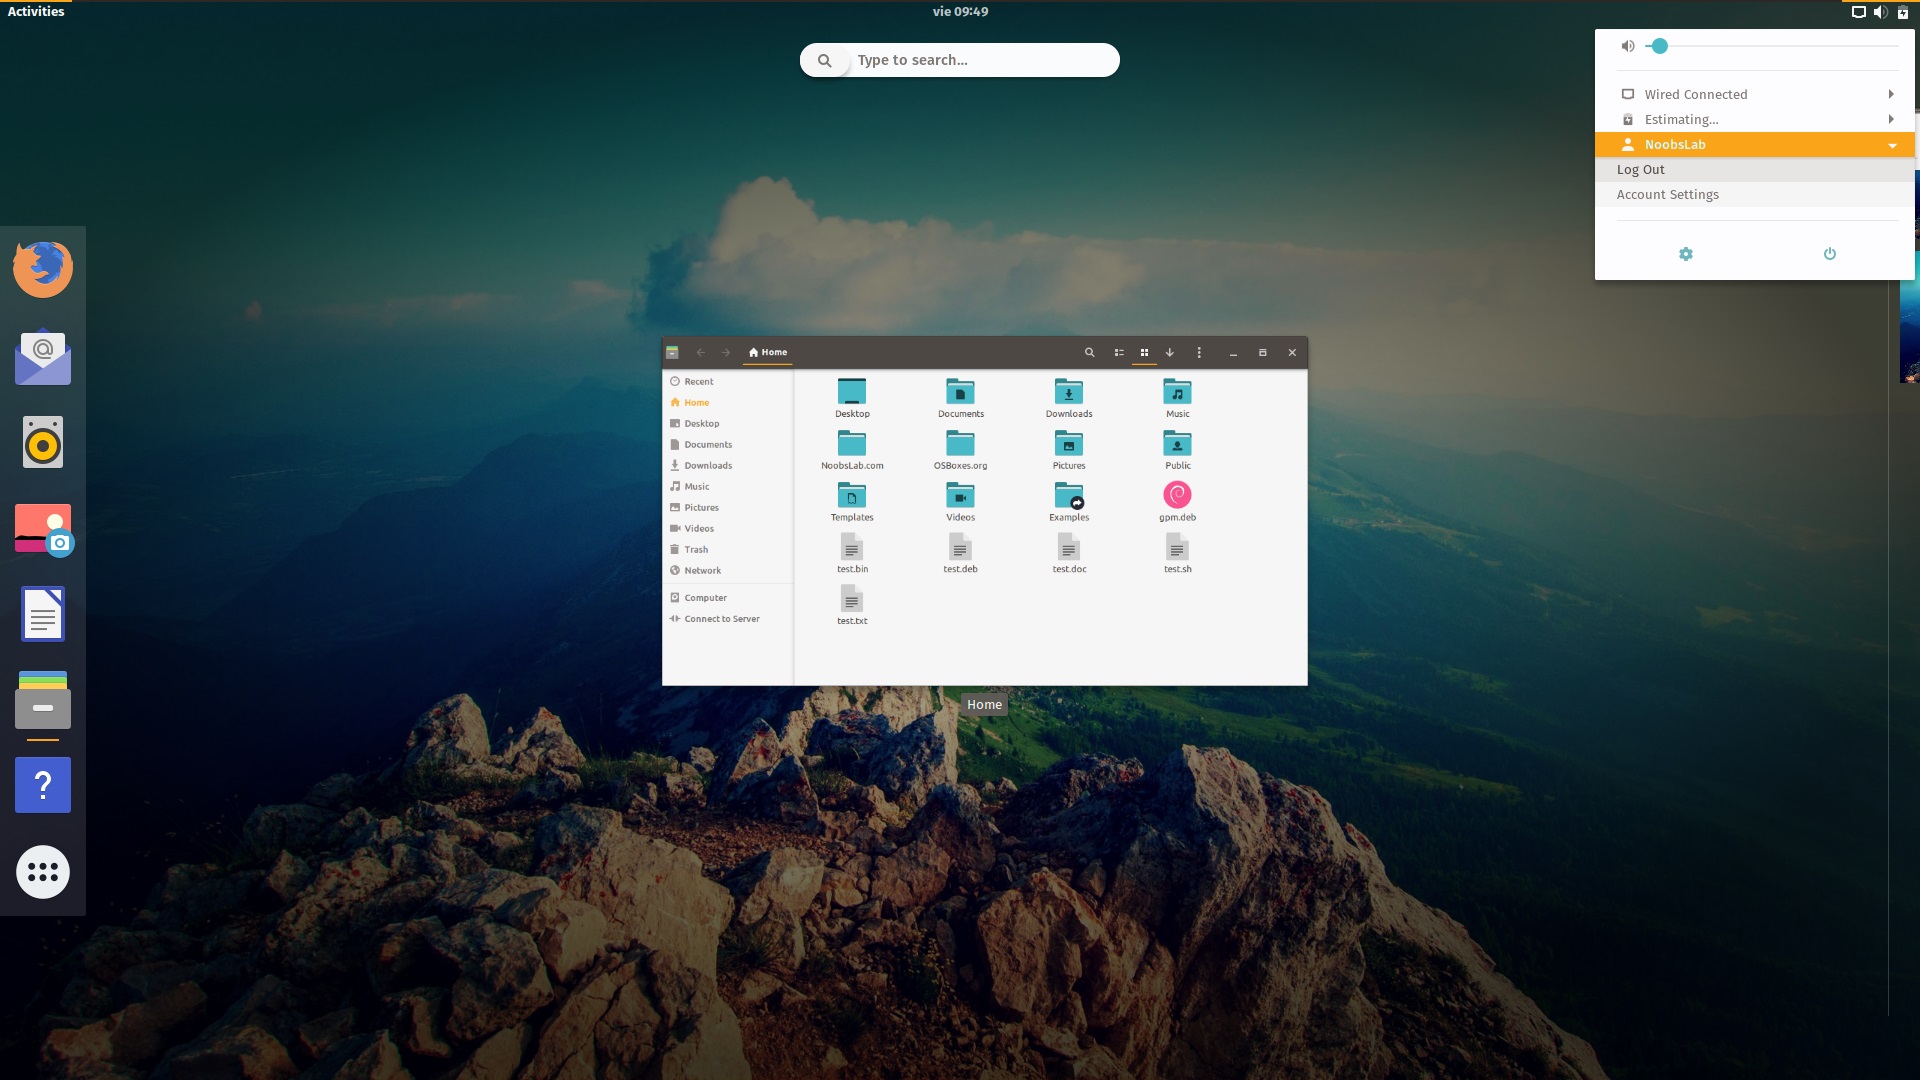 Download Themes For Ubuntu - A collection of